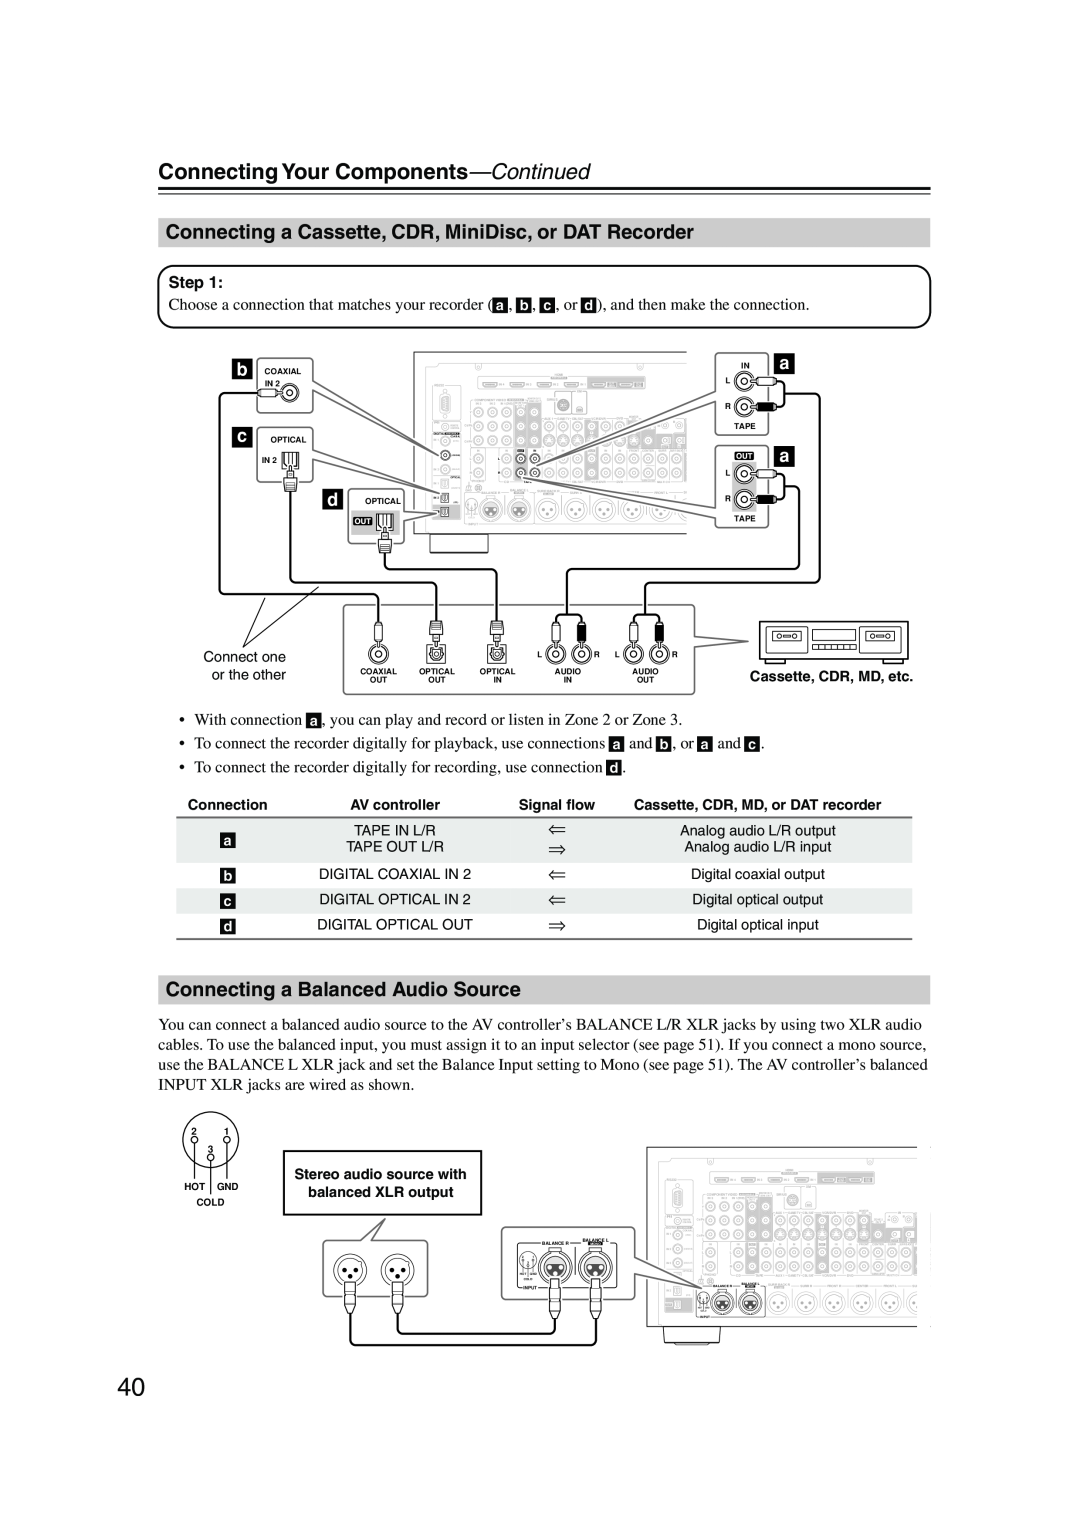 Onkyo PR-SC885 instruction manual Connecting a Balanced Audio Source, Connecting Your Components—Continued 